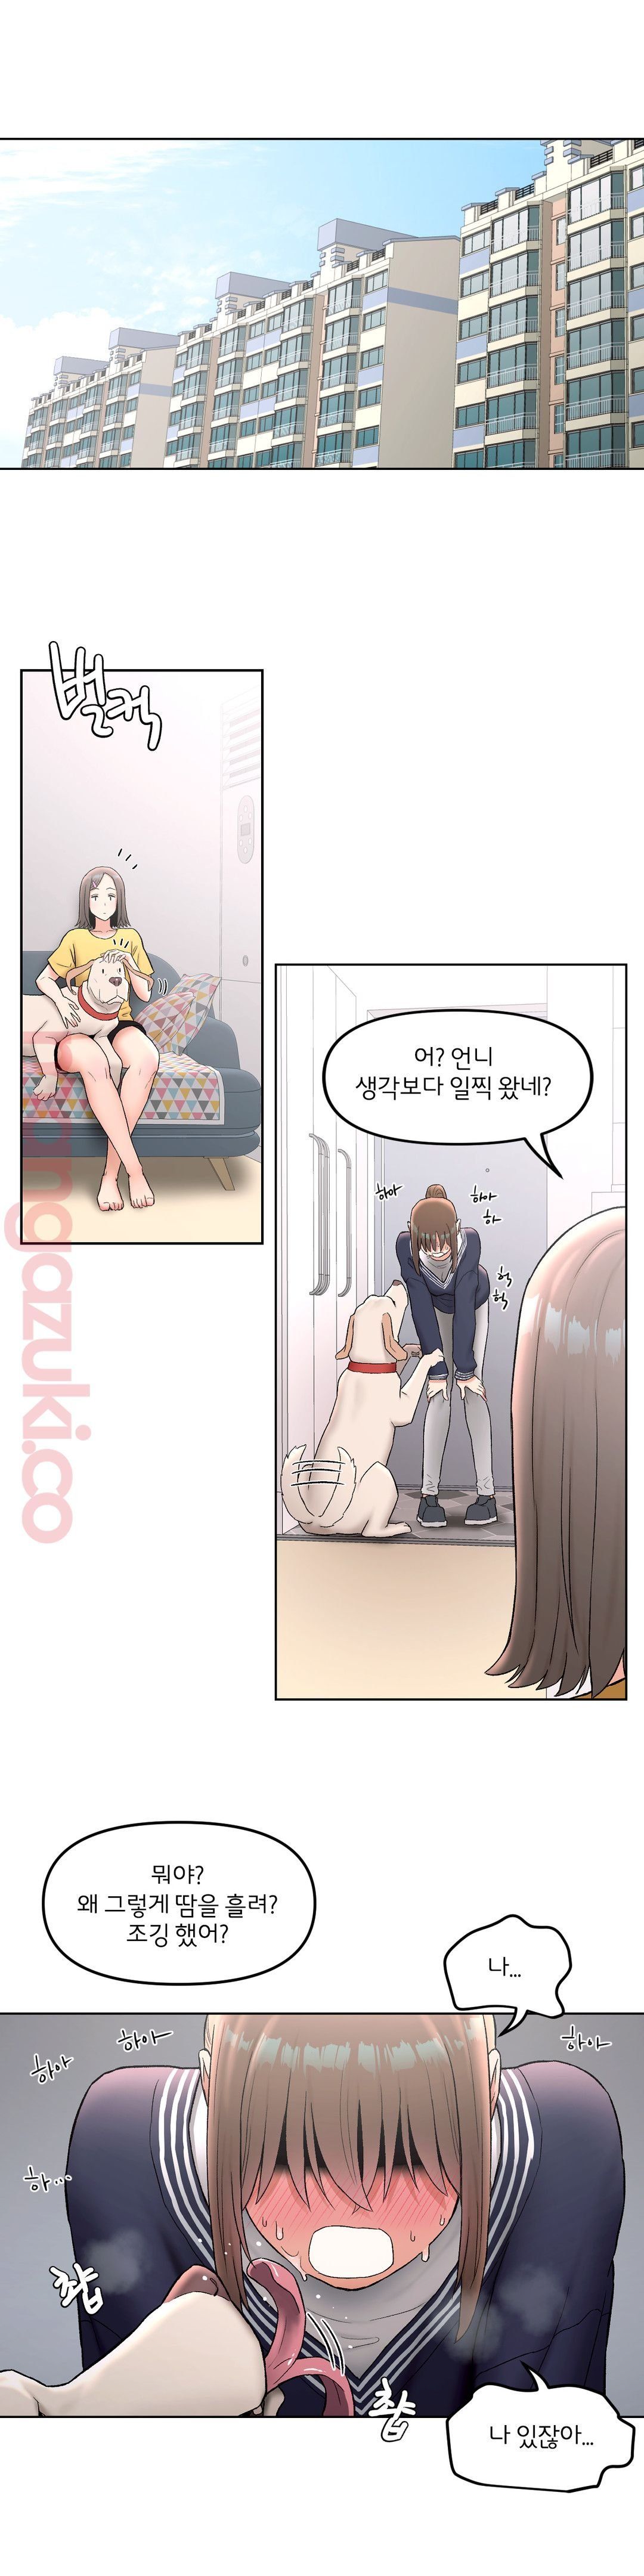 Sexercise Raw - Chapter 53 Page 1